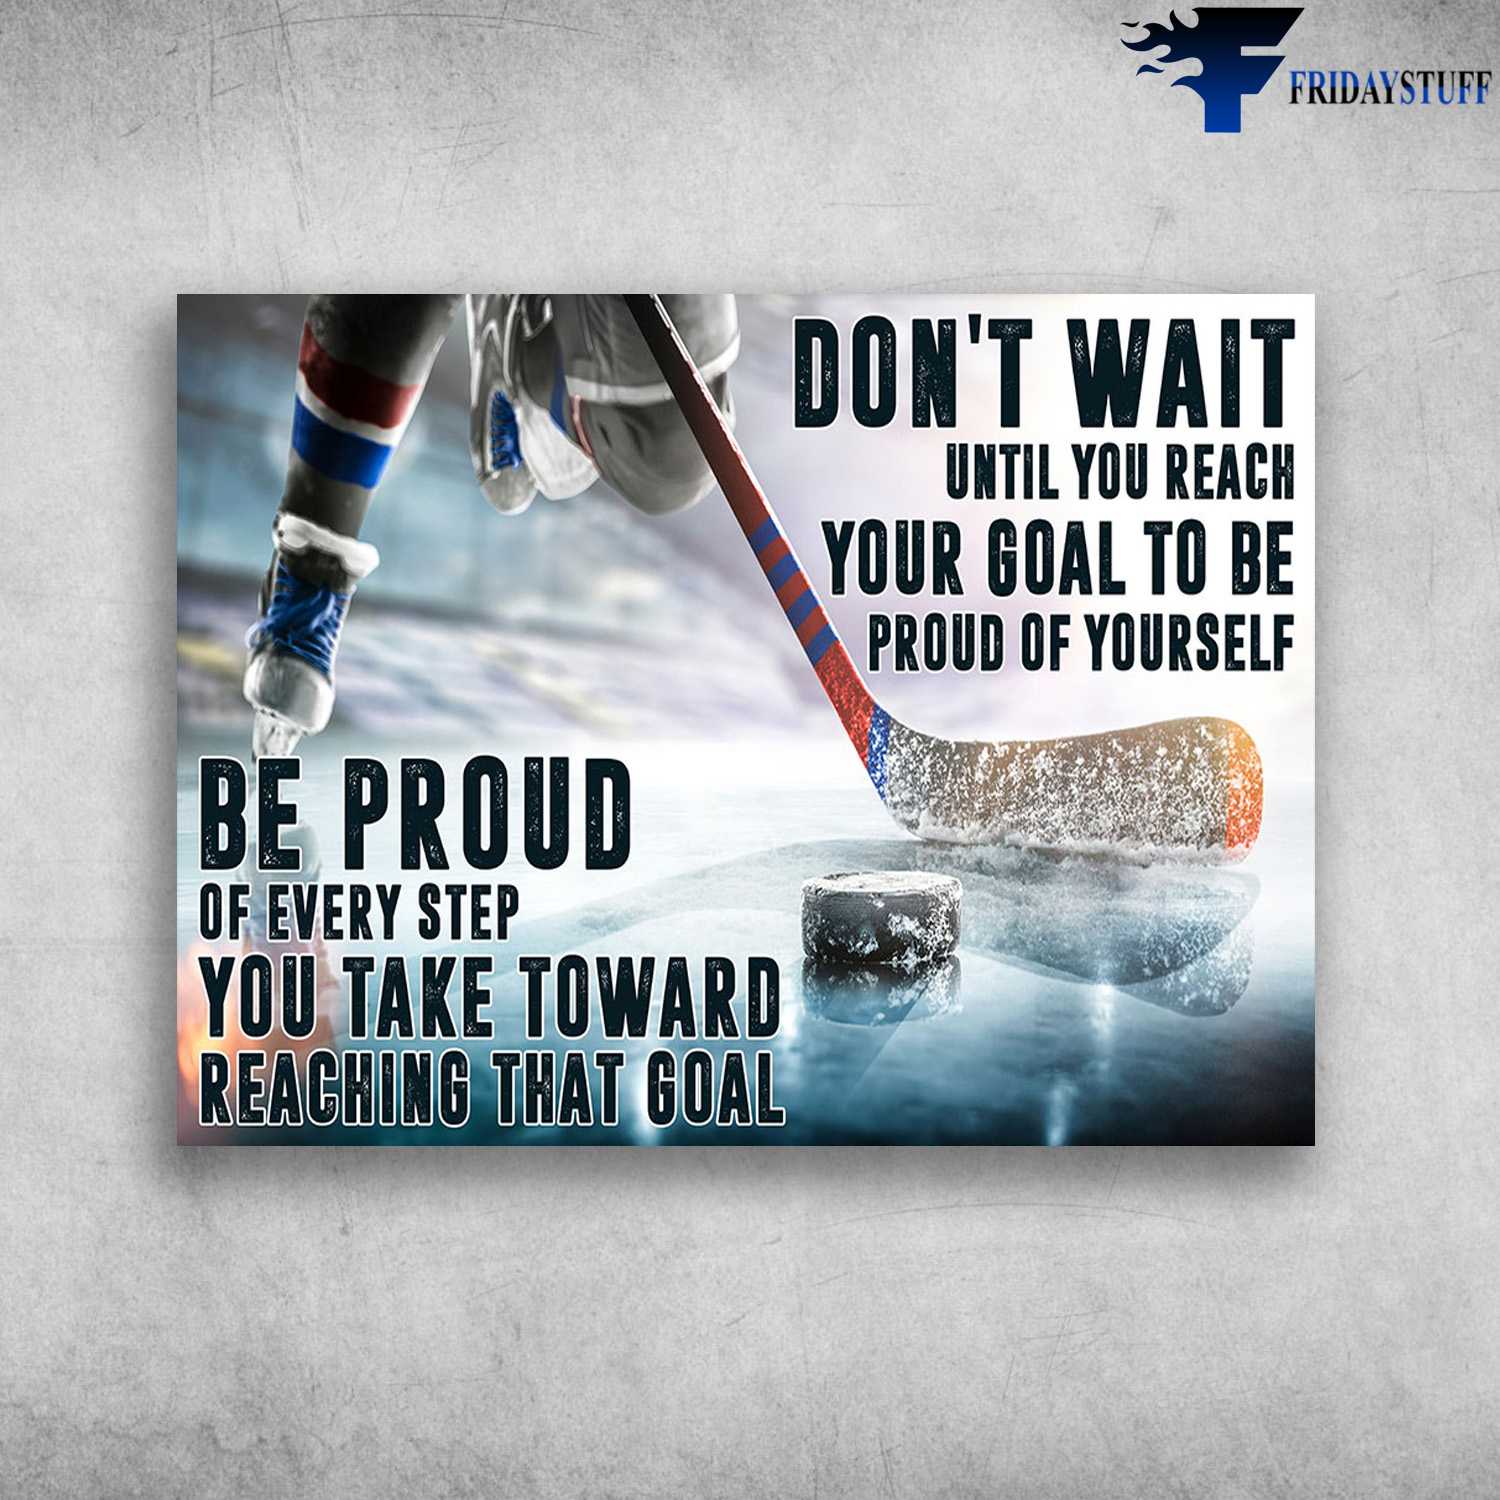 Hockey Poster - Don't Wait Until You Reach, Your Goal To Be Proud Of Yourself, Be Proud Of Every Step, You Take Toward Reaching That Goal